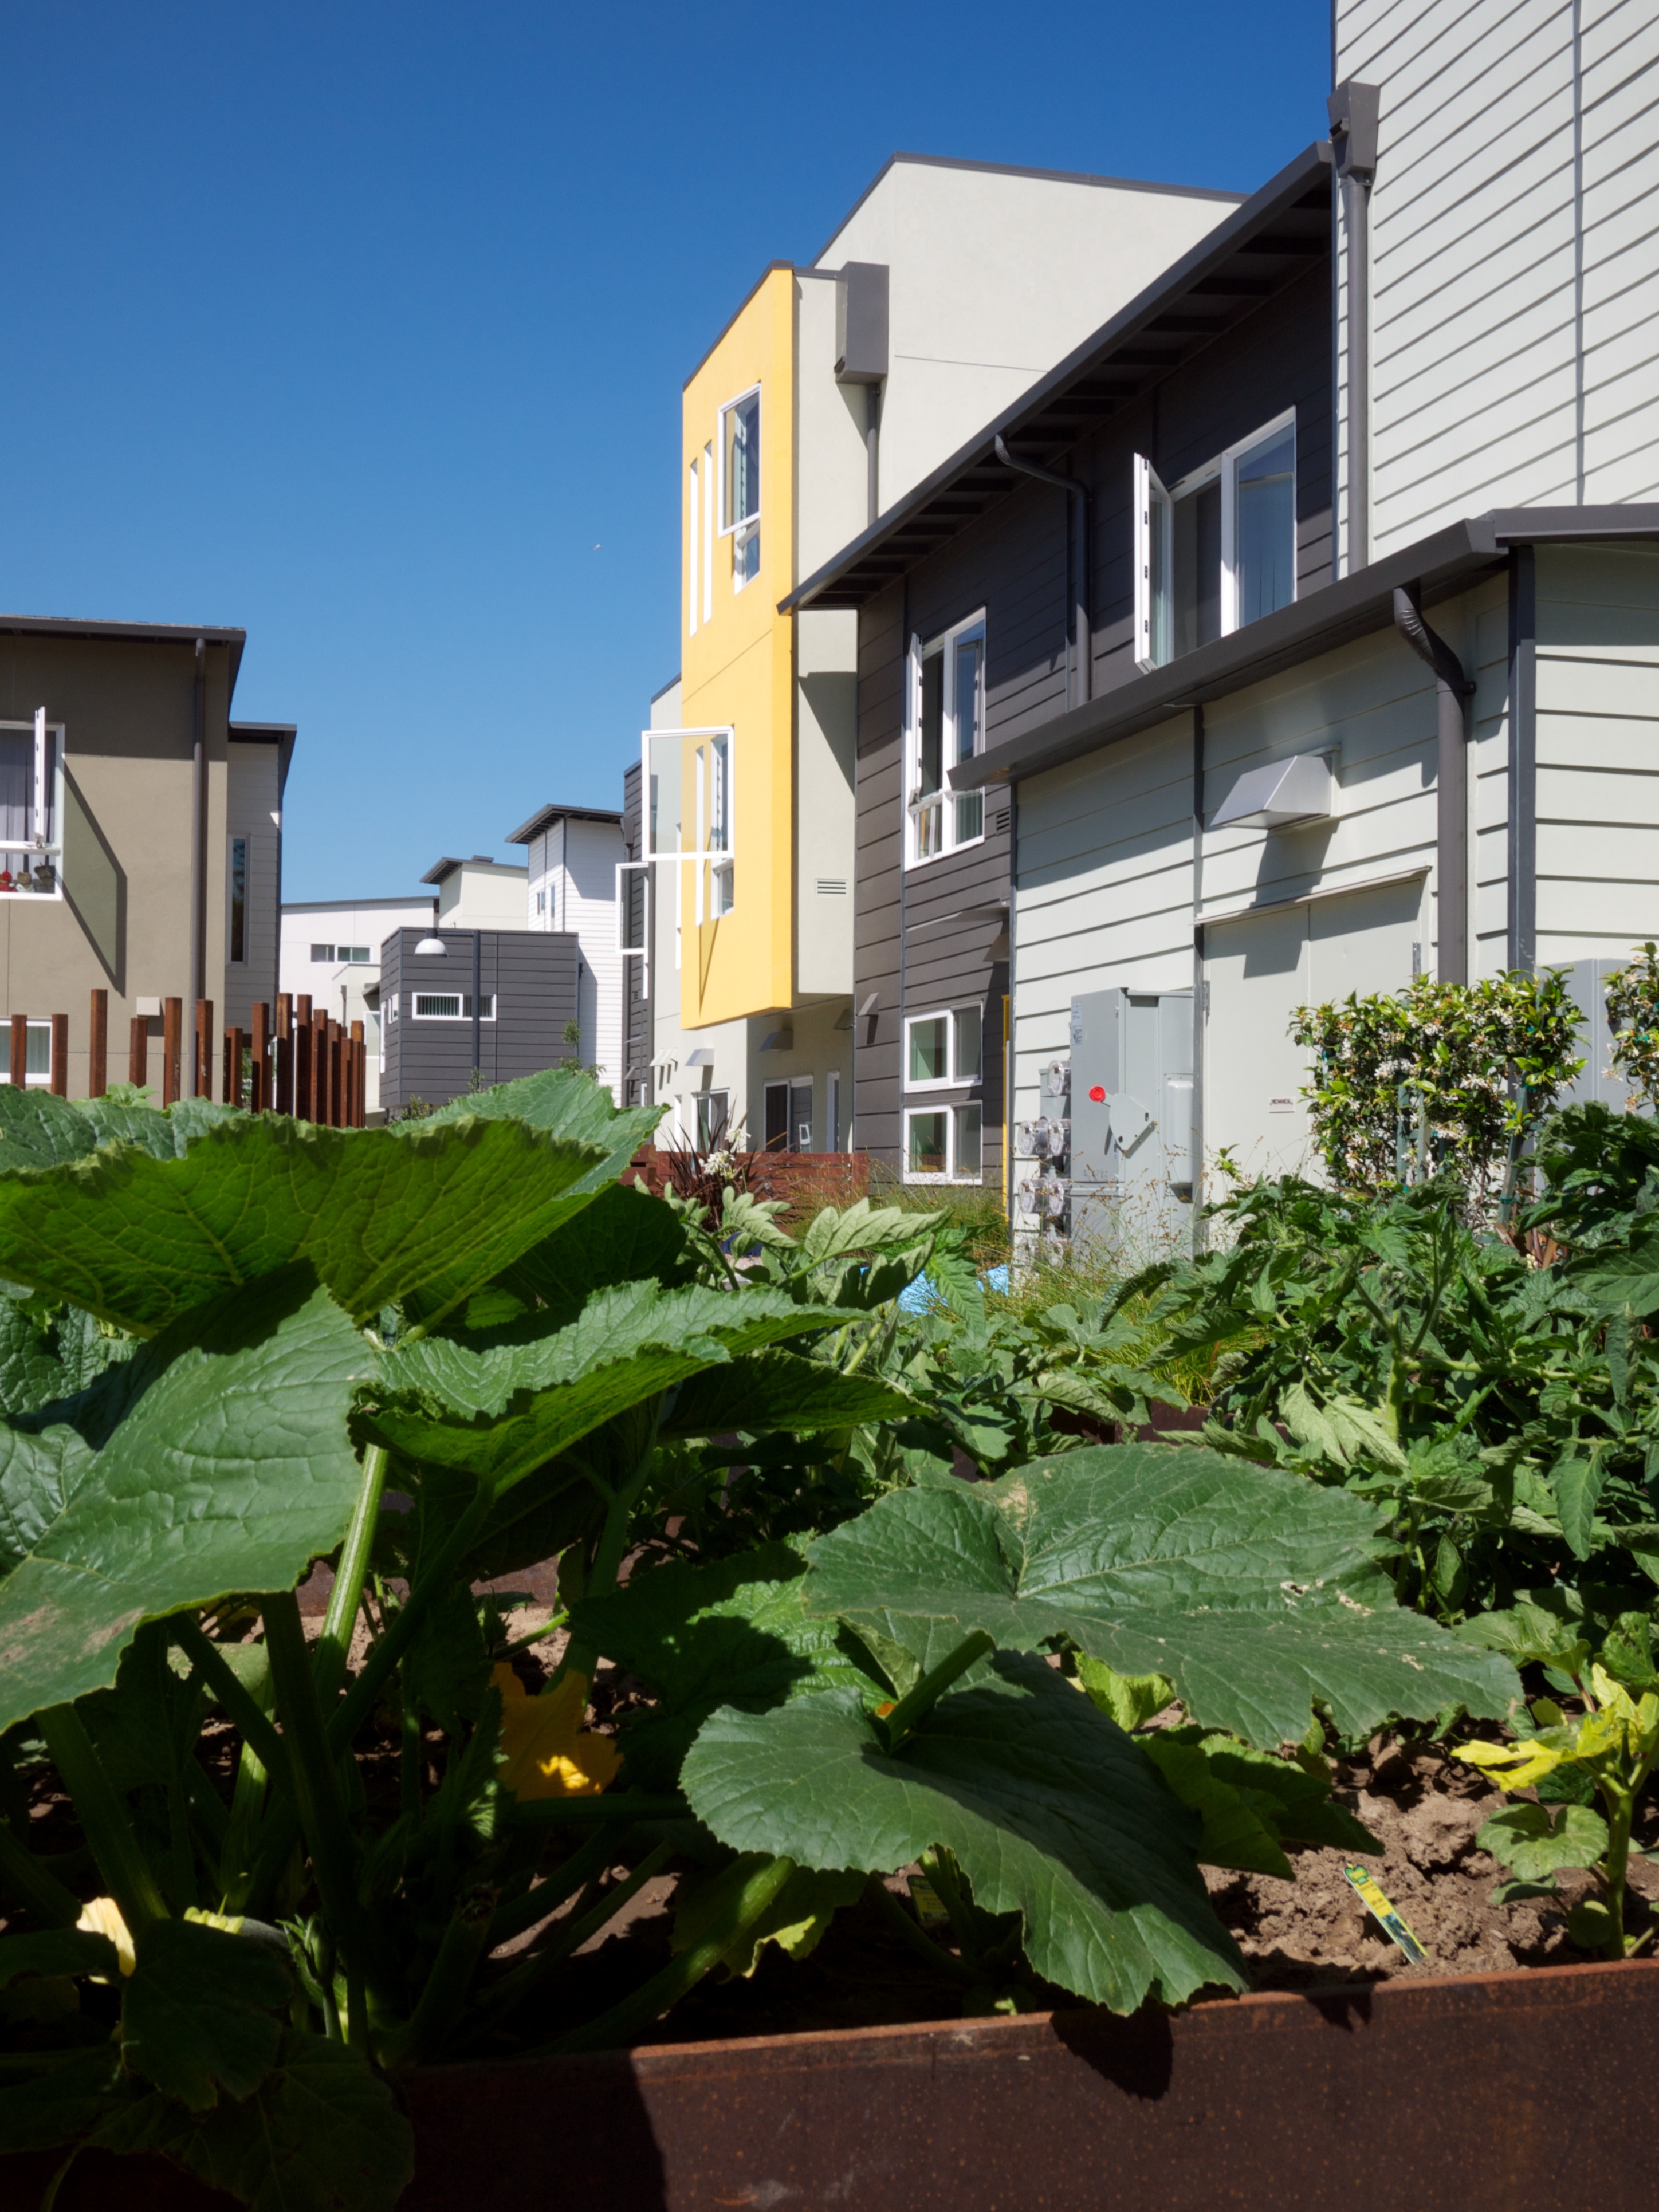 Exterior view of townhouses and garden at Tassafaronga Village in East Oakland, CA. 